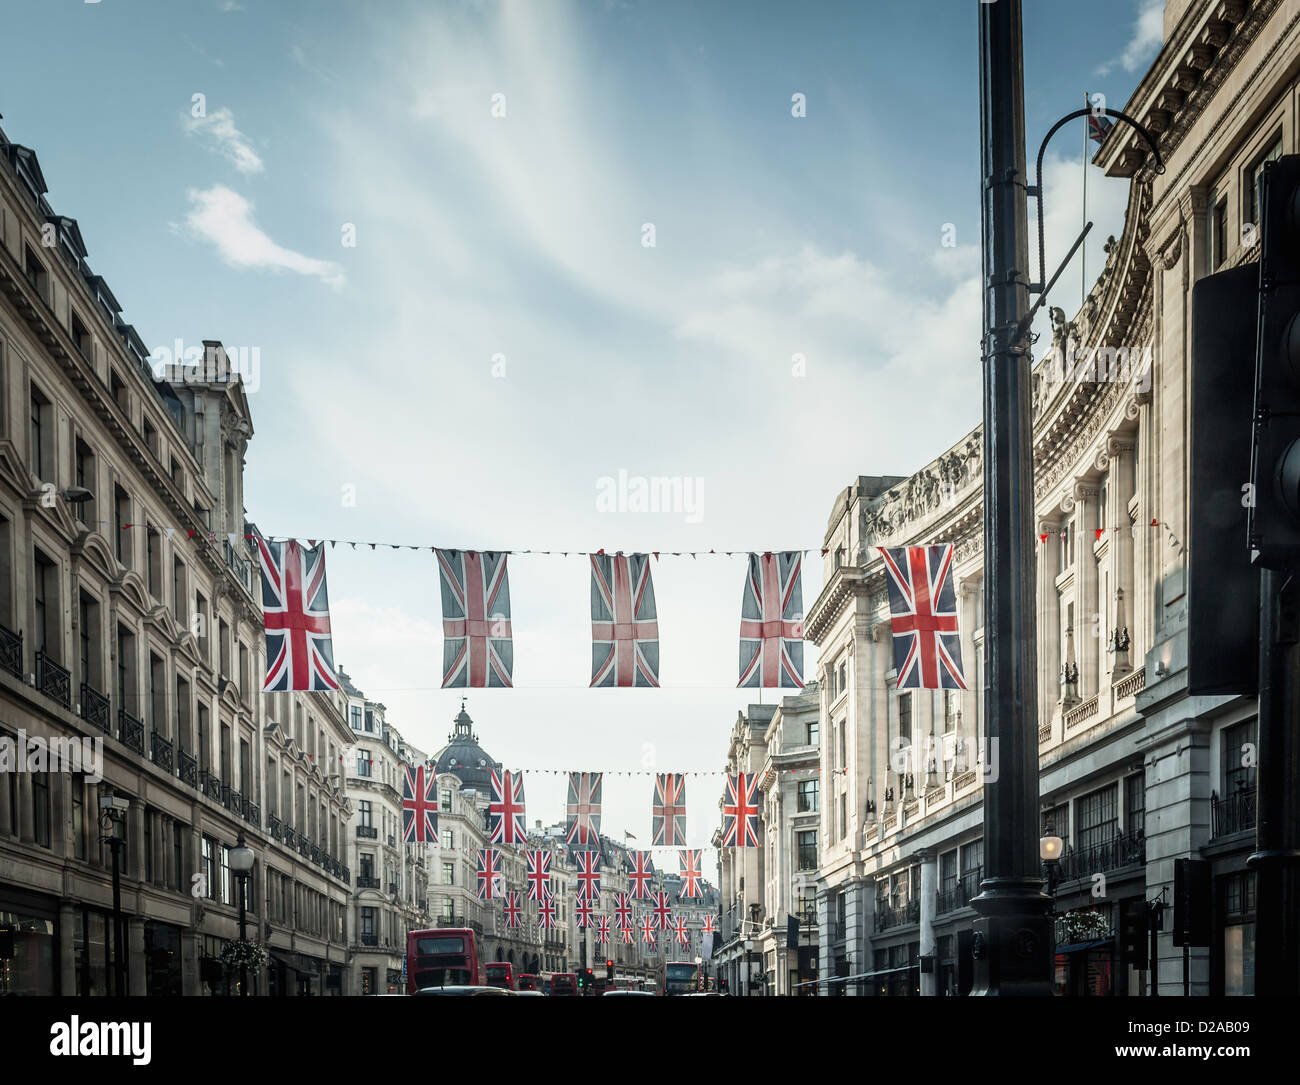 British flags hanging over city street Stock Photo